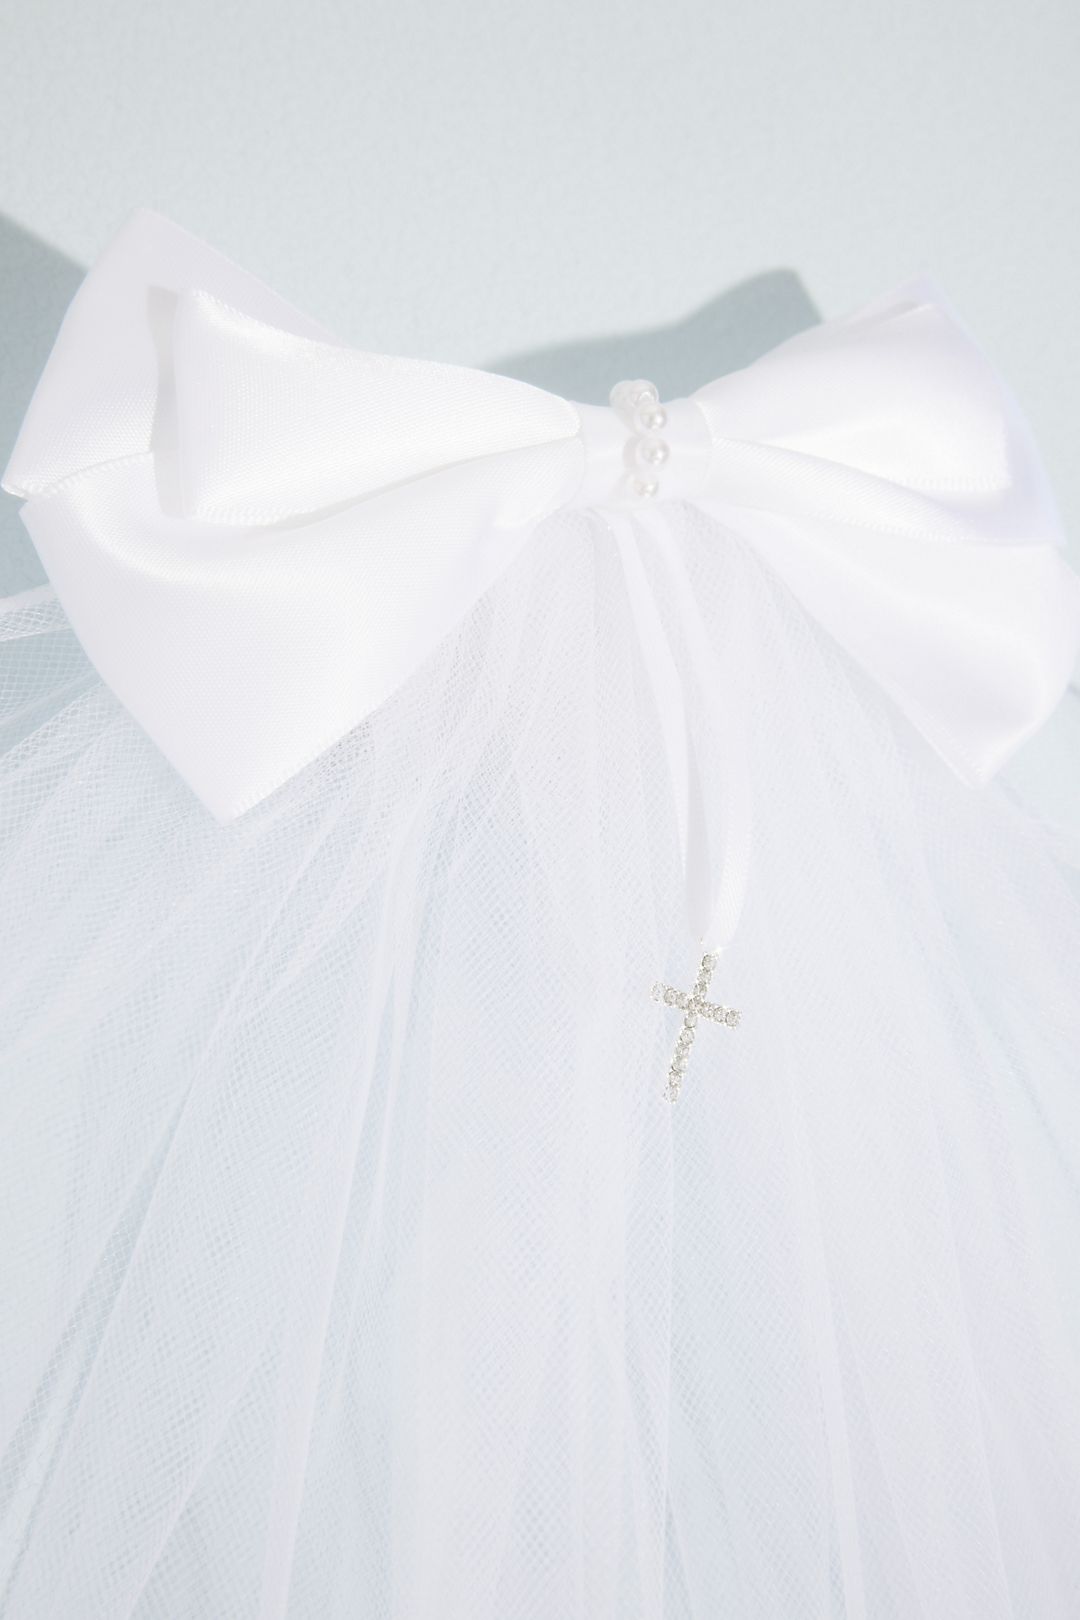 Tulle Communion Veil with Bow Image 2